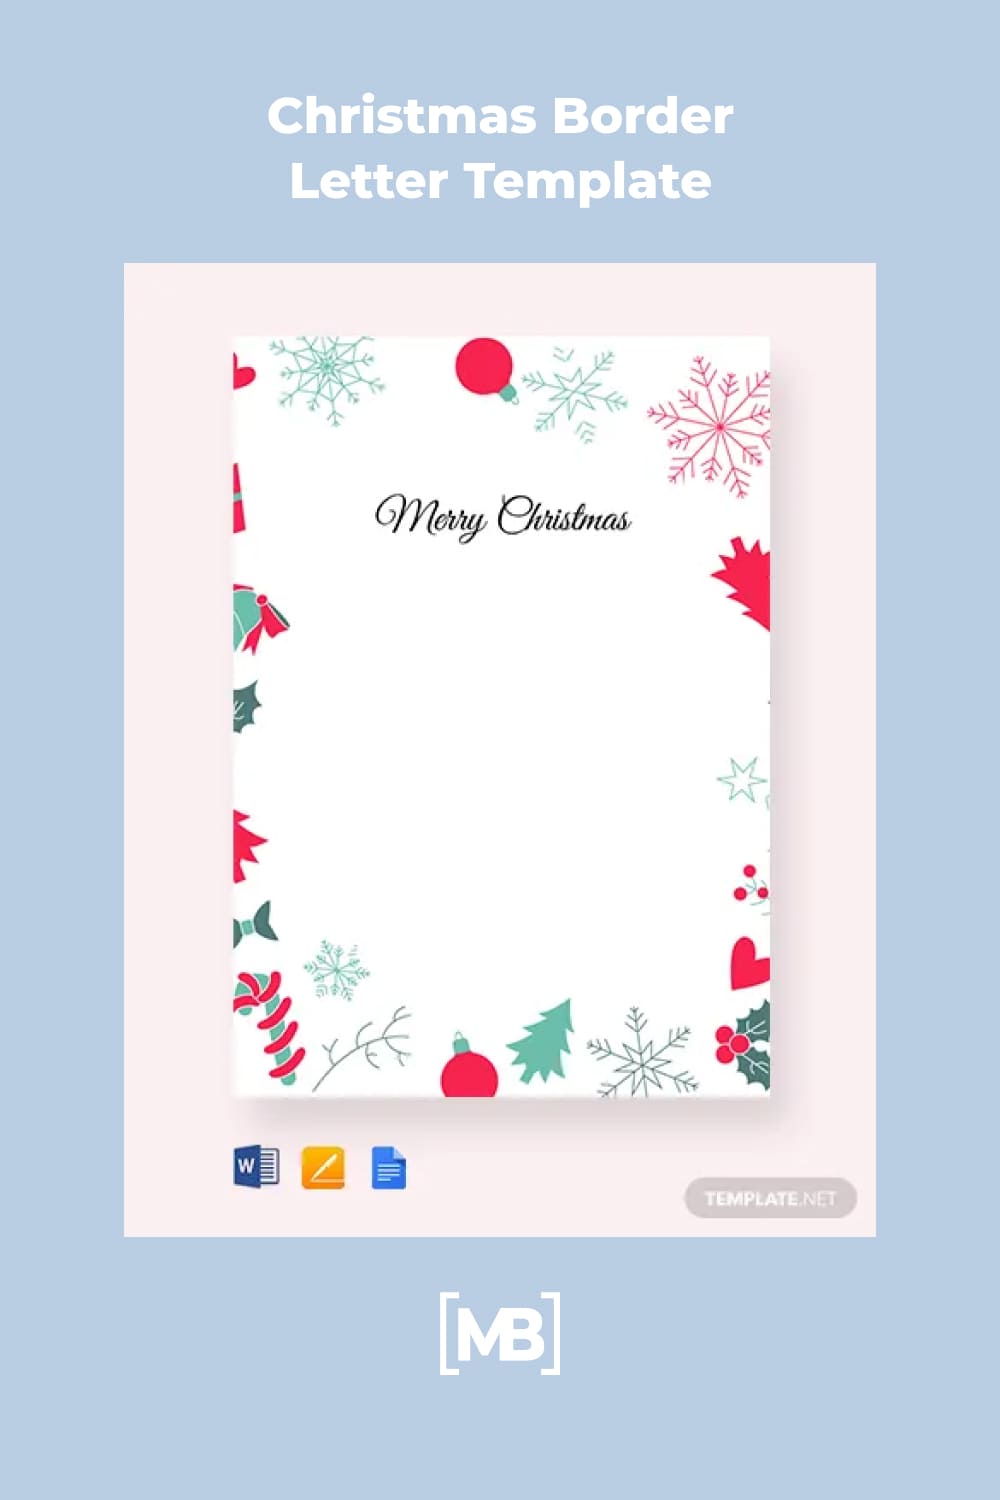 Adorn your writing with this festive and colorful graphic design.